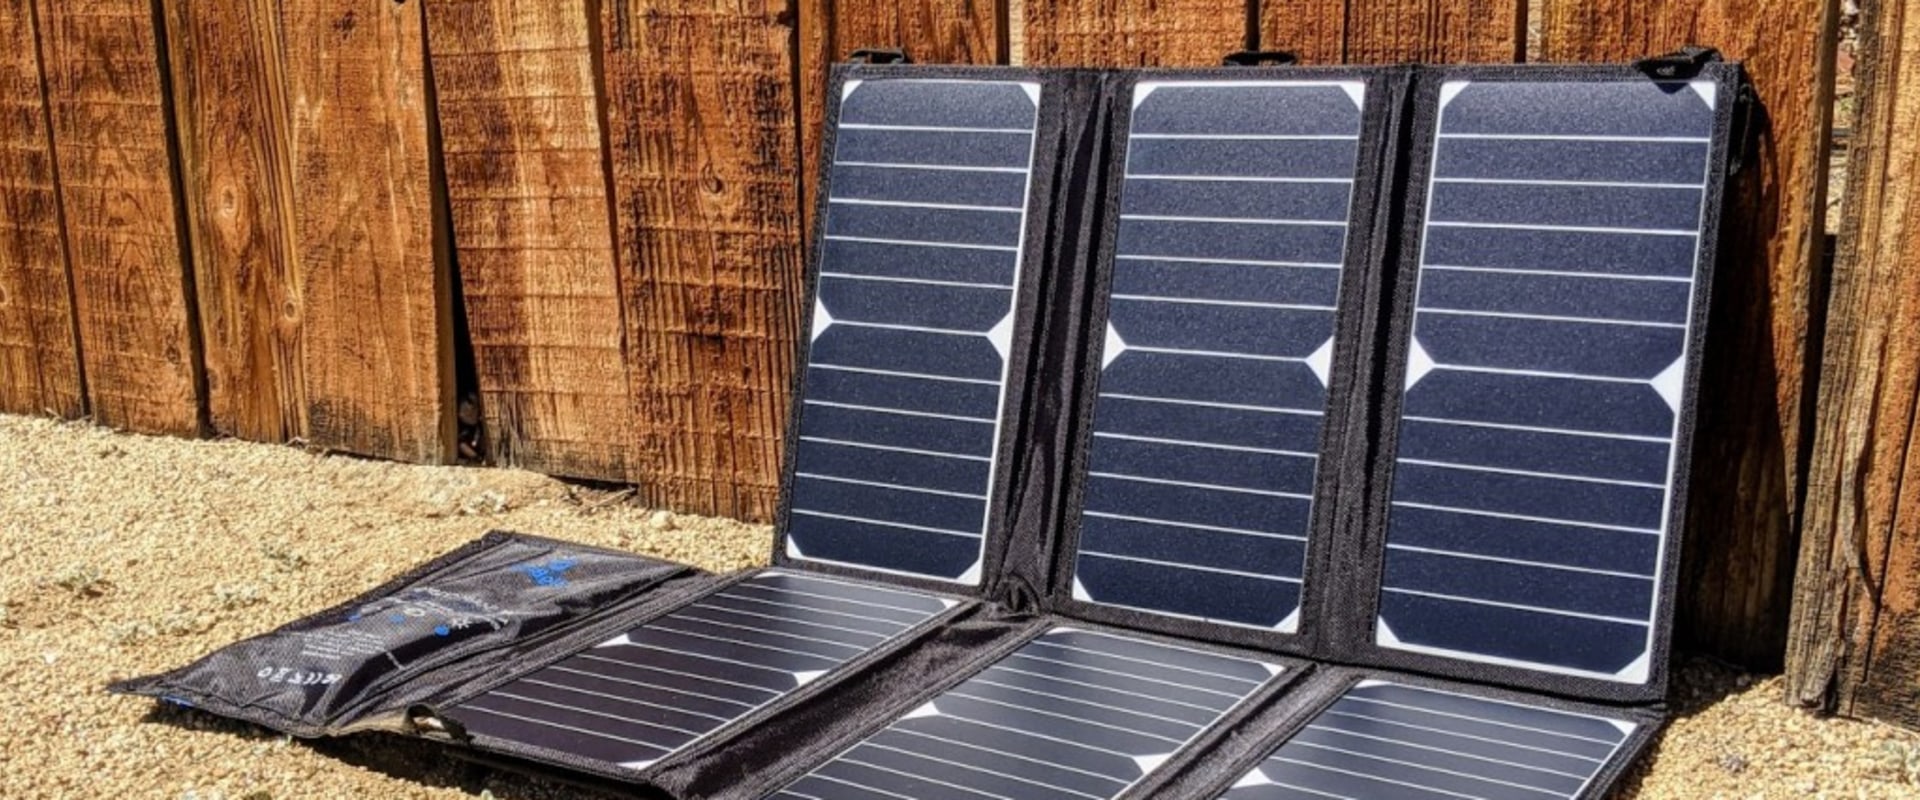 Are Solar Phone Chargers Worth It?